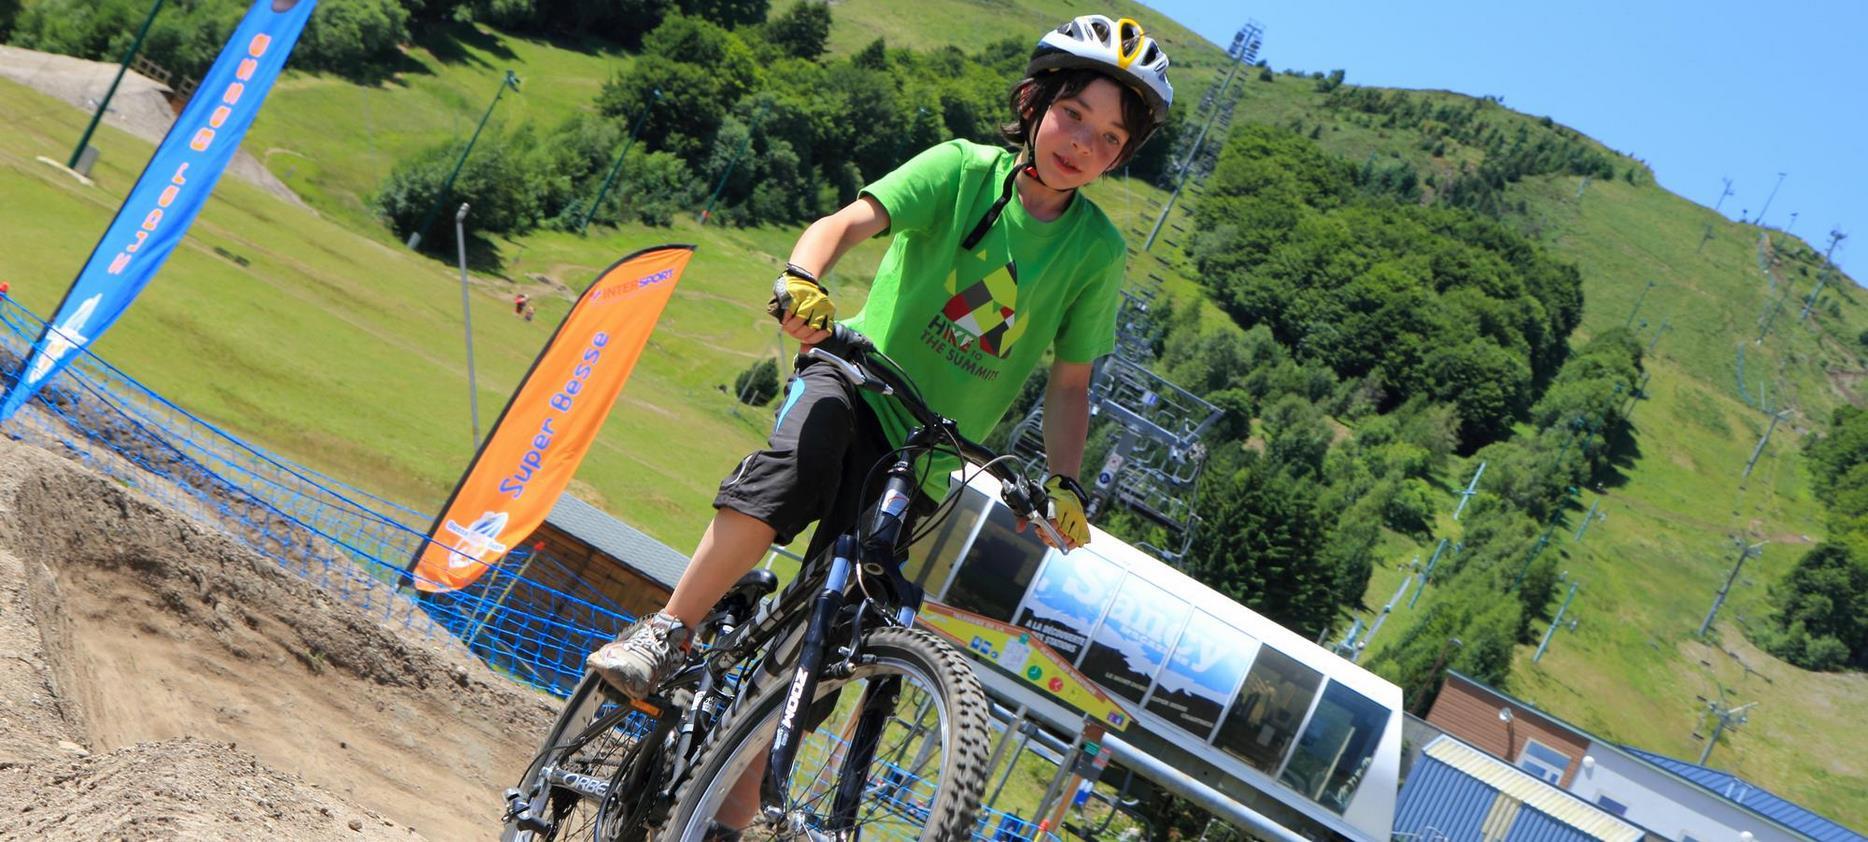 Mountain biking, exercise at Velo a Super Besse